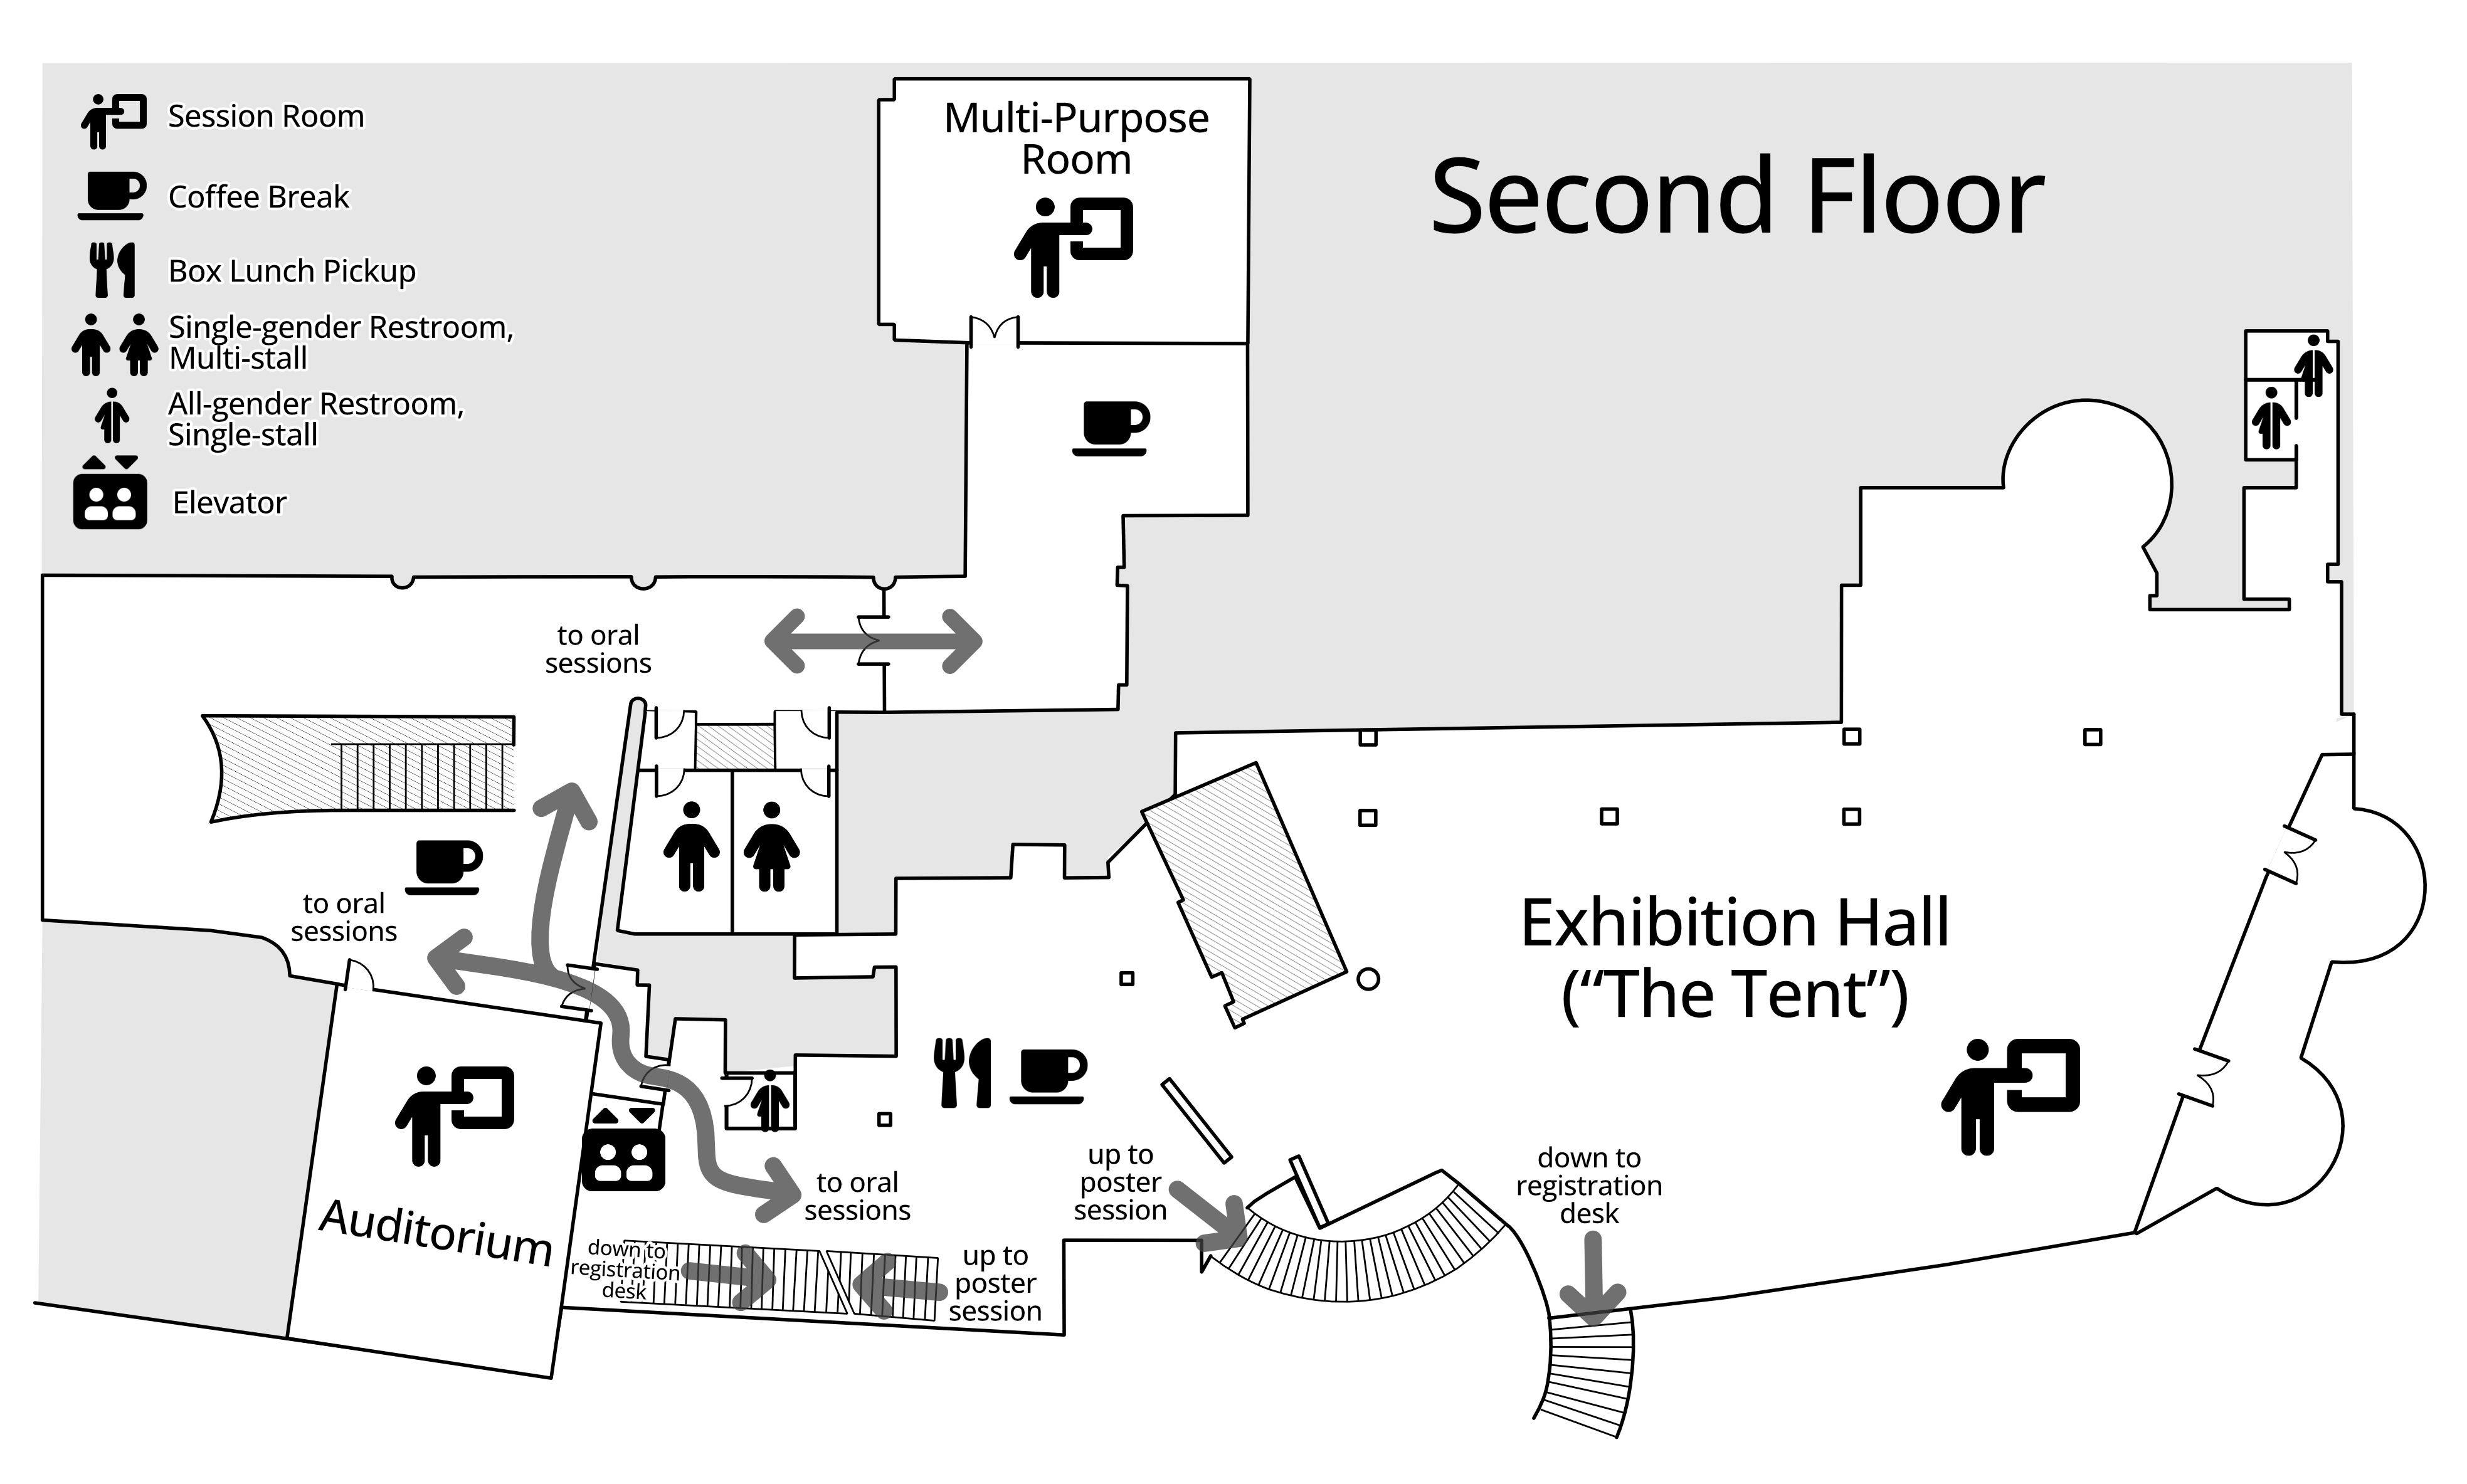 Map of ICMB XI spaces on the second floor of the Colwell Center